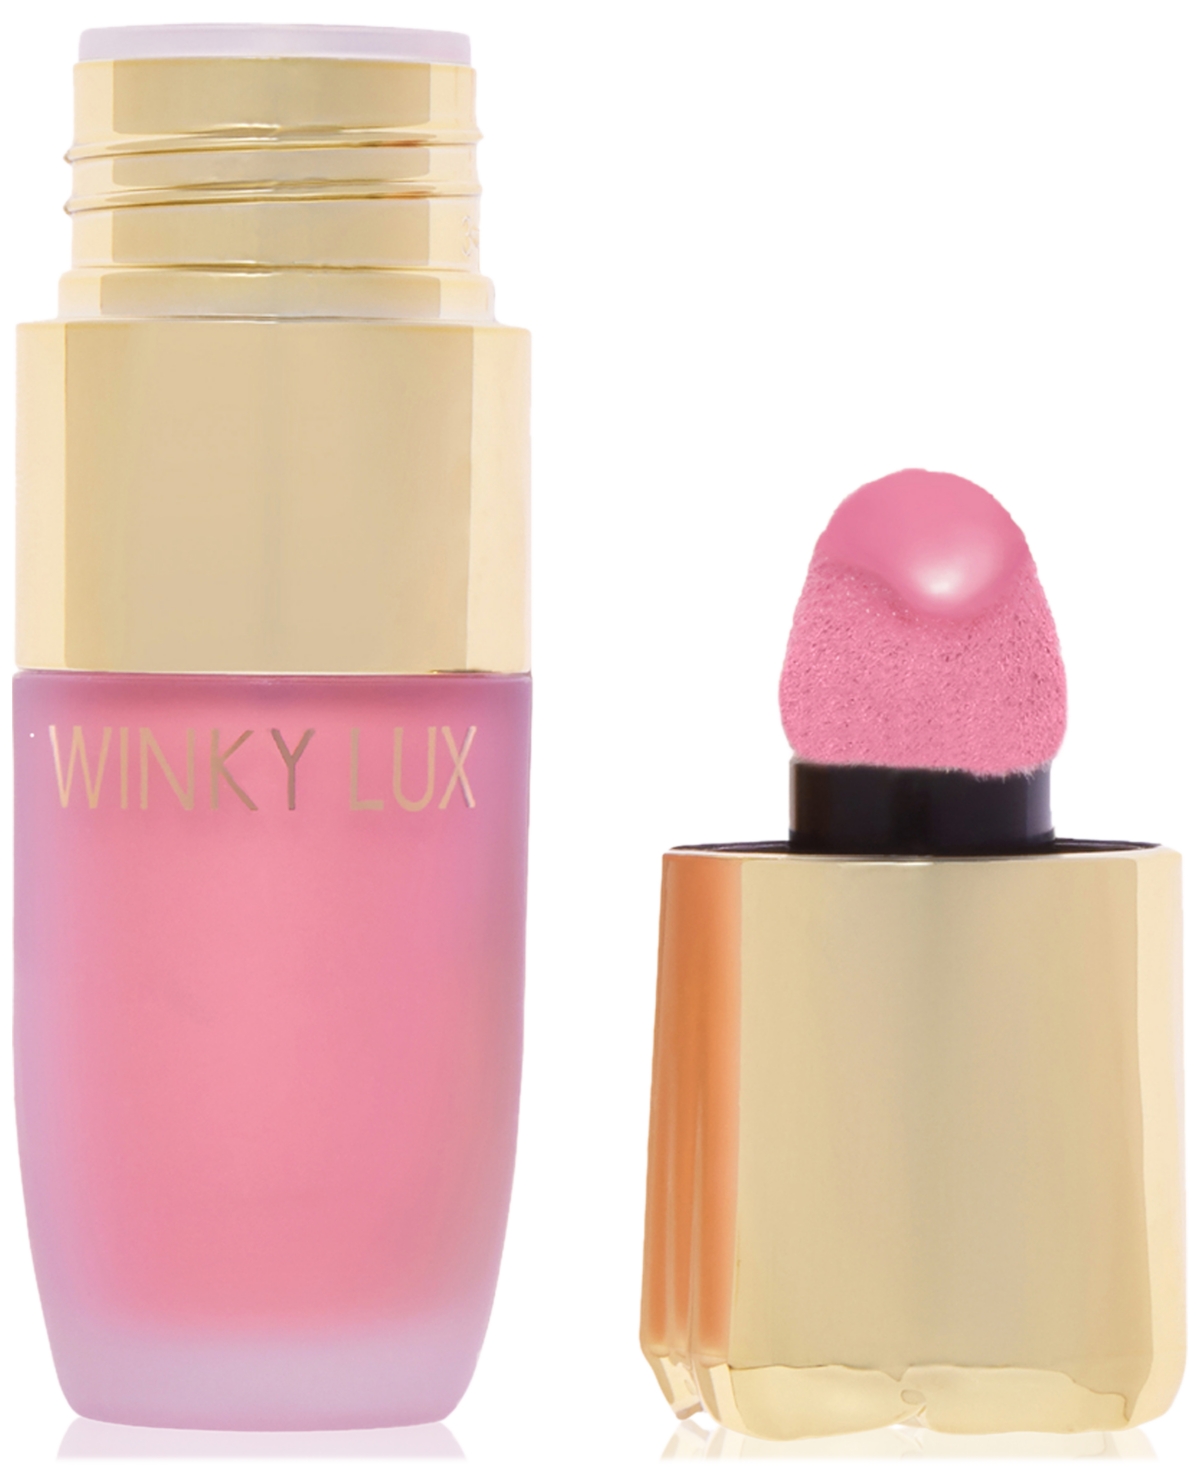 Winky Lux Cheeky Rose Liquid Blush In Lovely